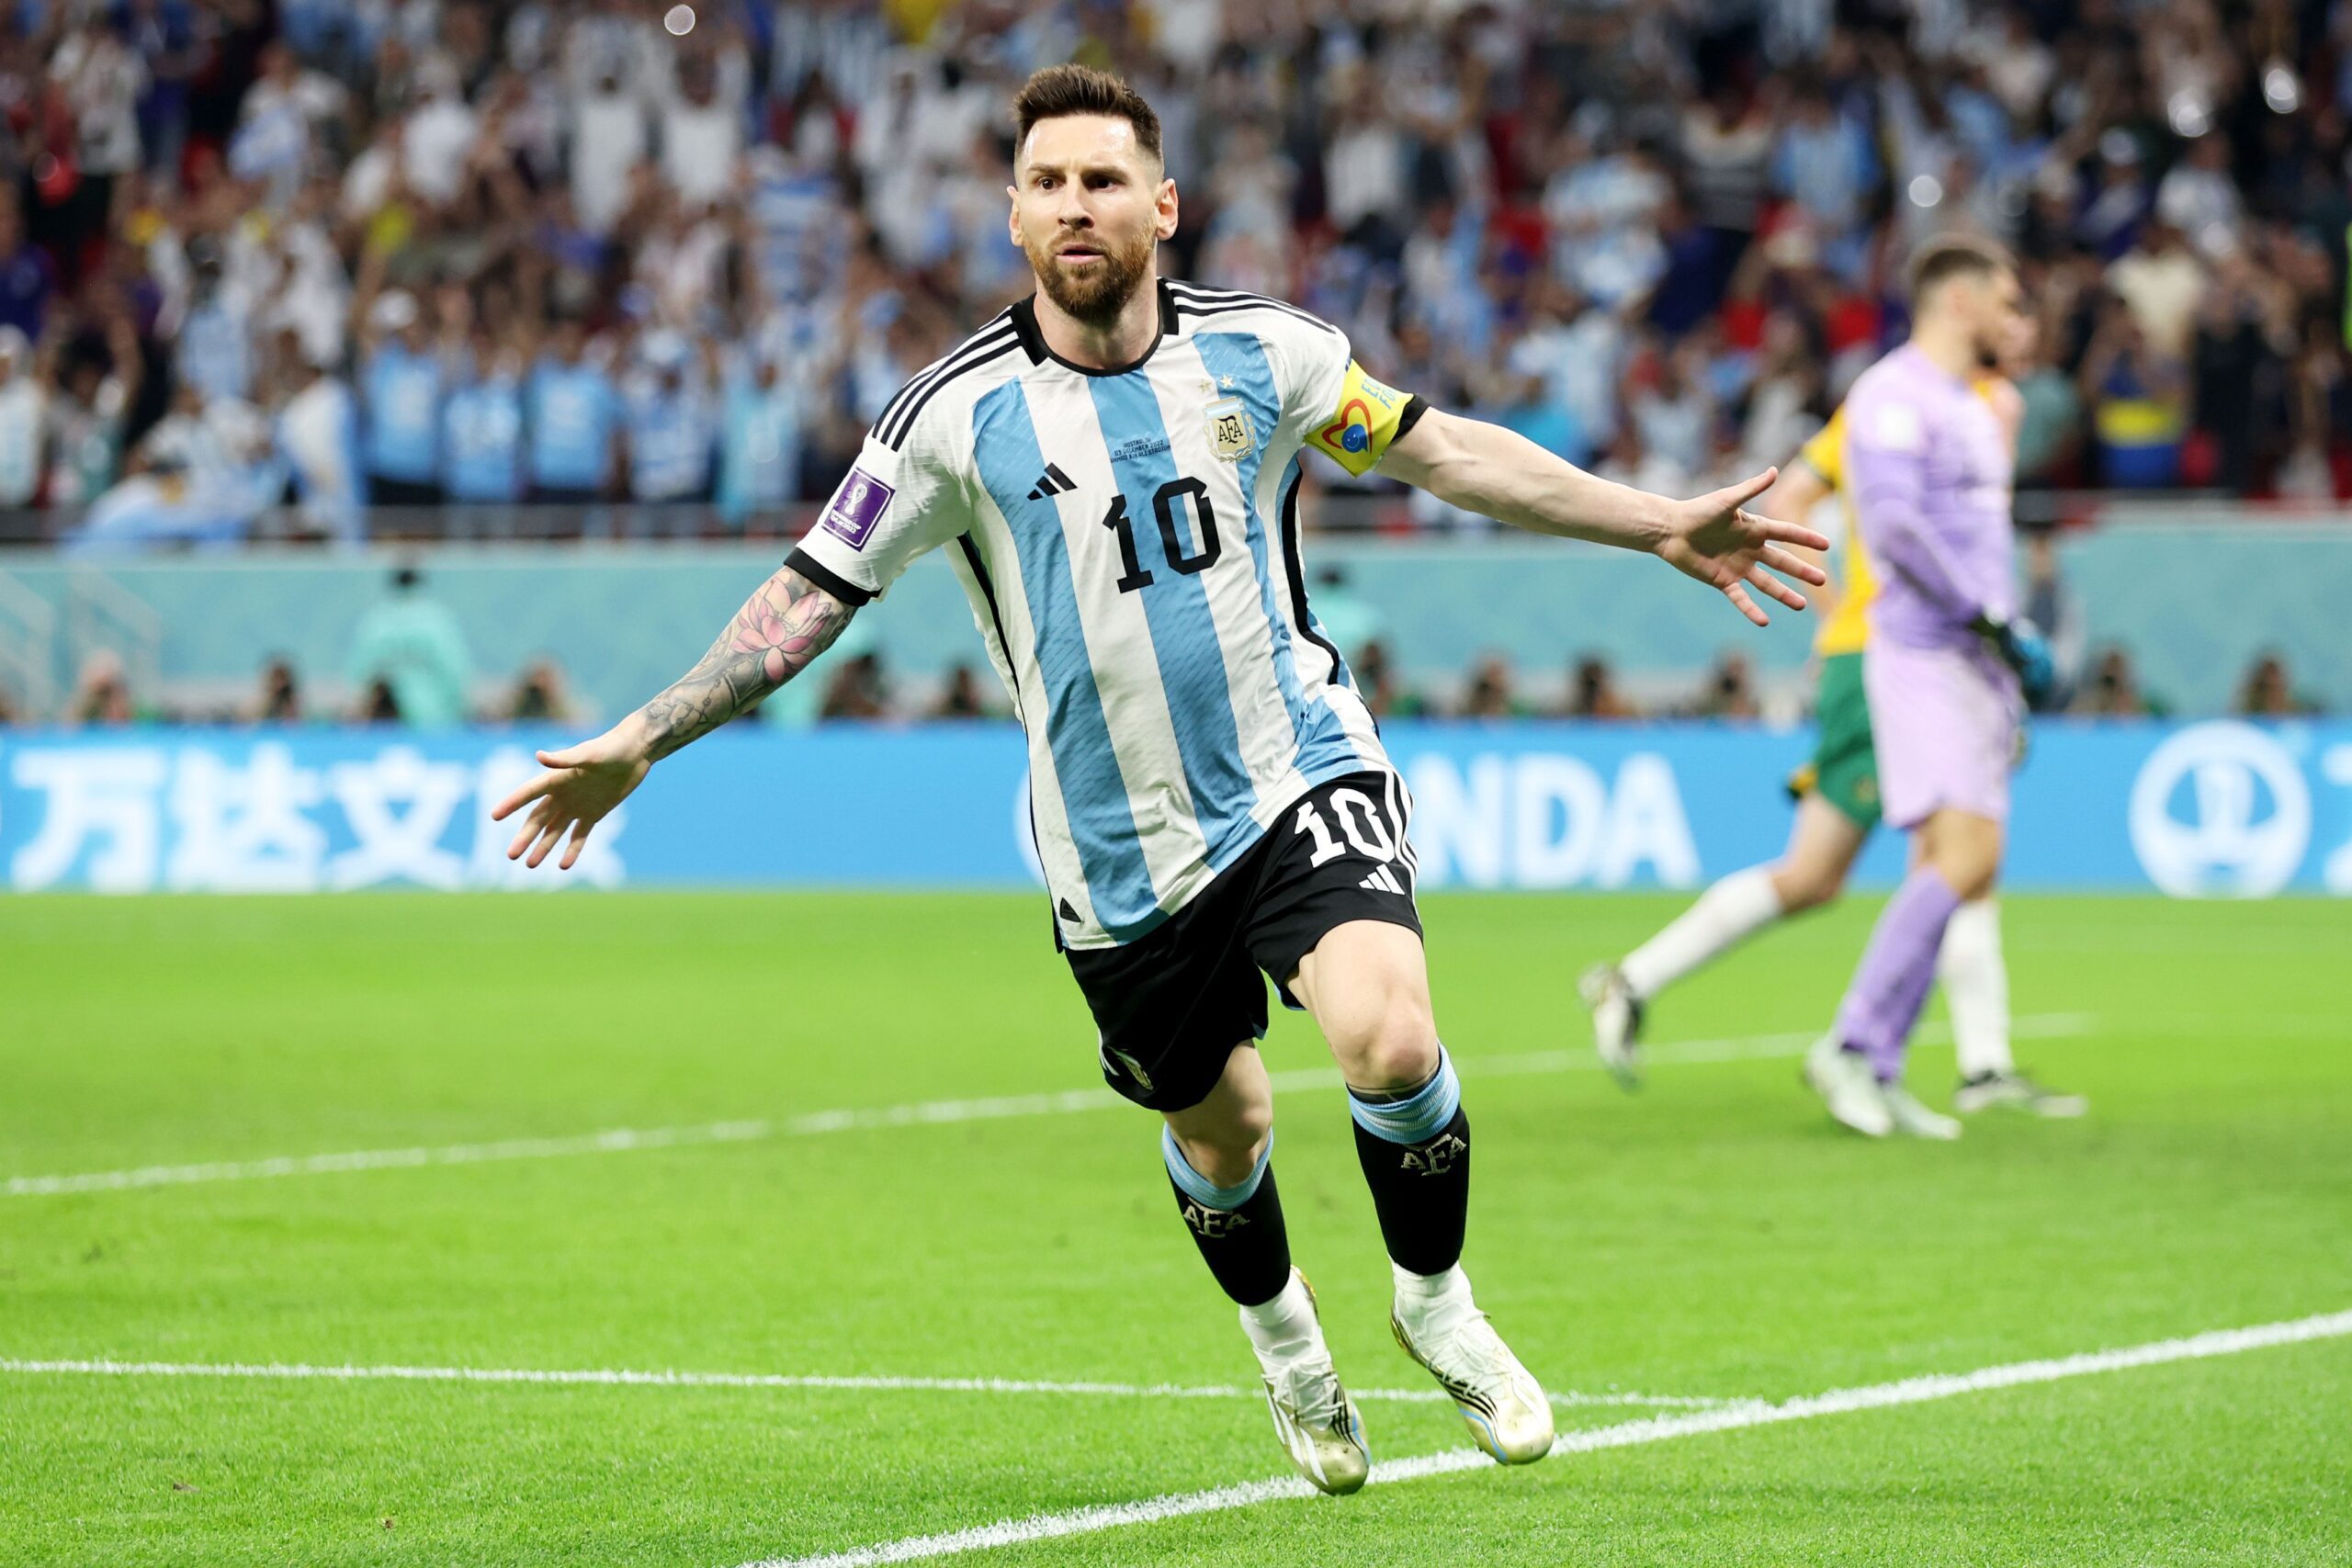 Lionel Messi has confirmed he will play his final World Cup game in the final on Sunday 